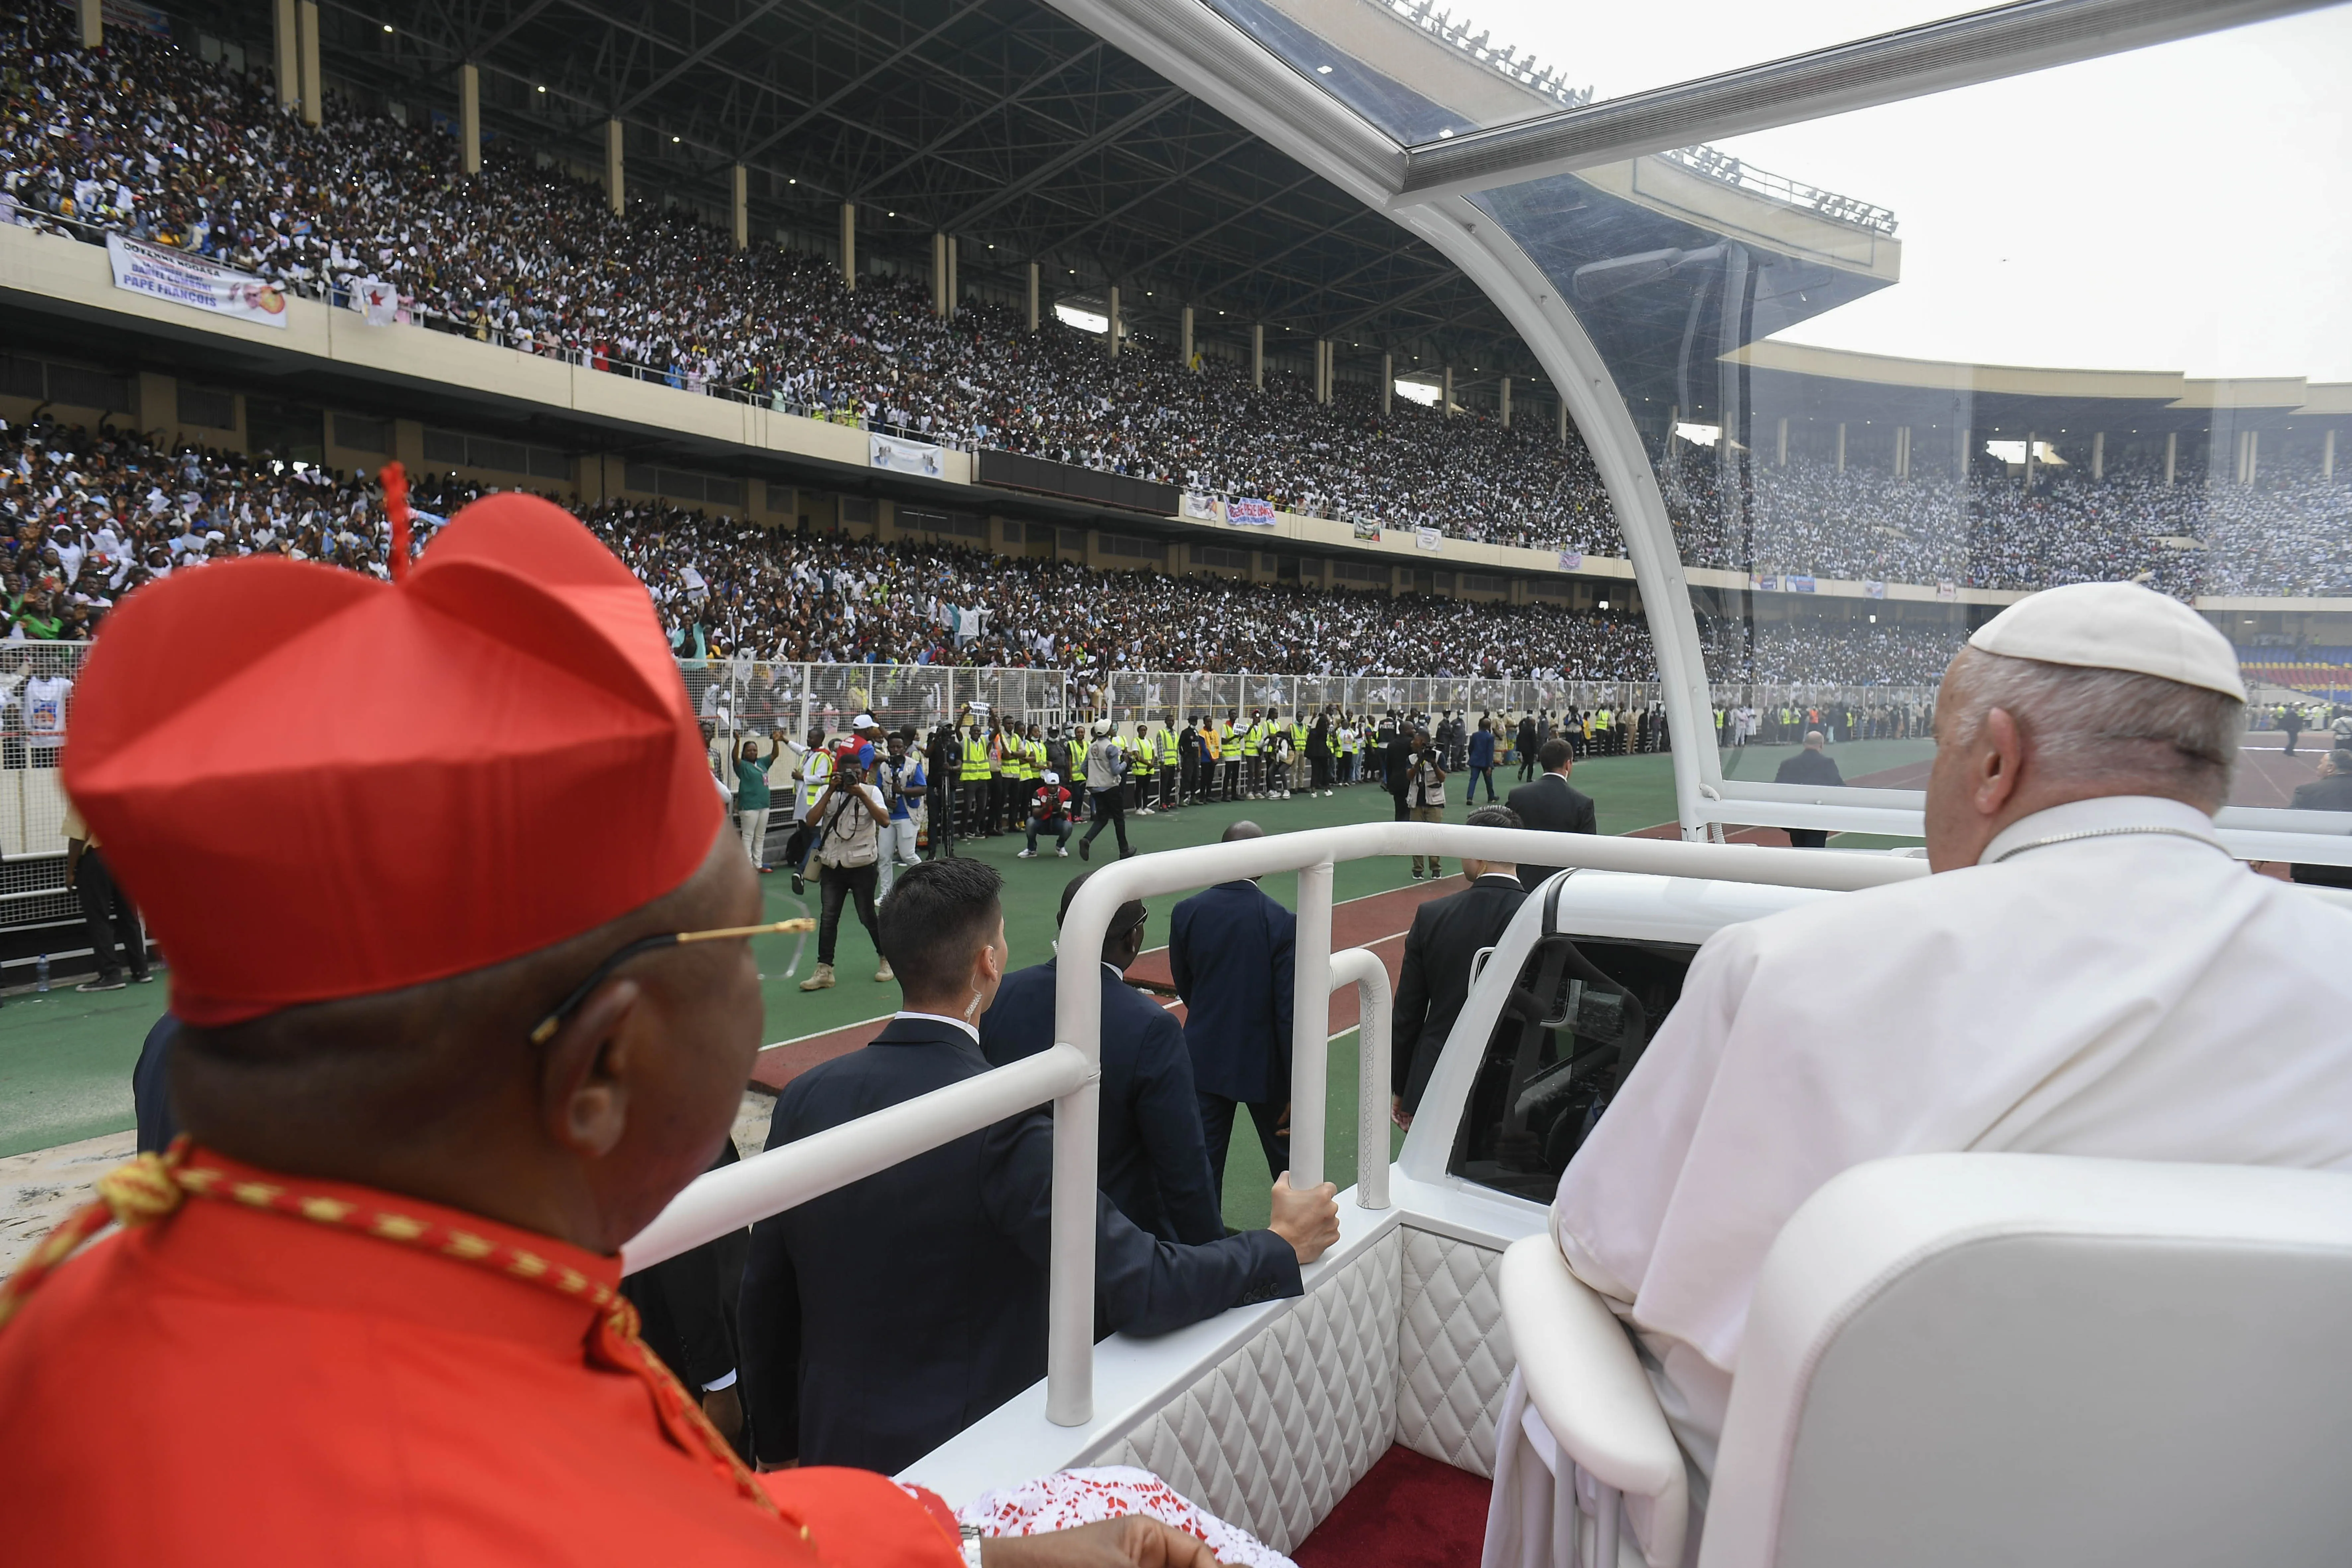 Pope Francis interacted with an energetic crowd of 65,000 young adults and catechists at Martyrs' Stadium in Kinshasa, Democratic Republic of Congo, on Feb. 2, 2023.?w=200&h=150